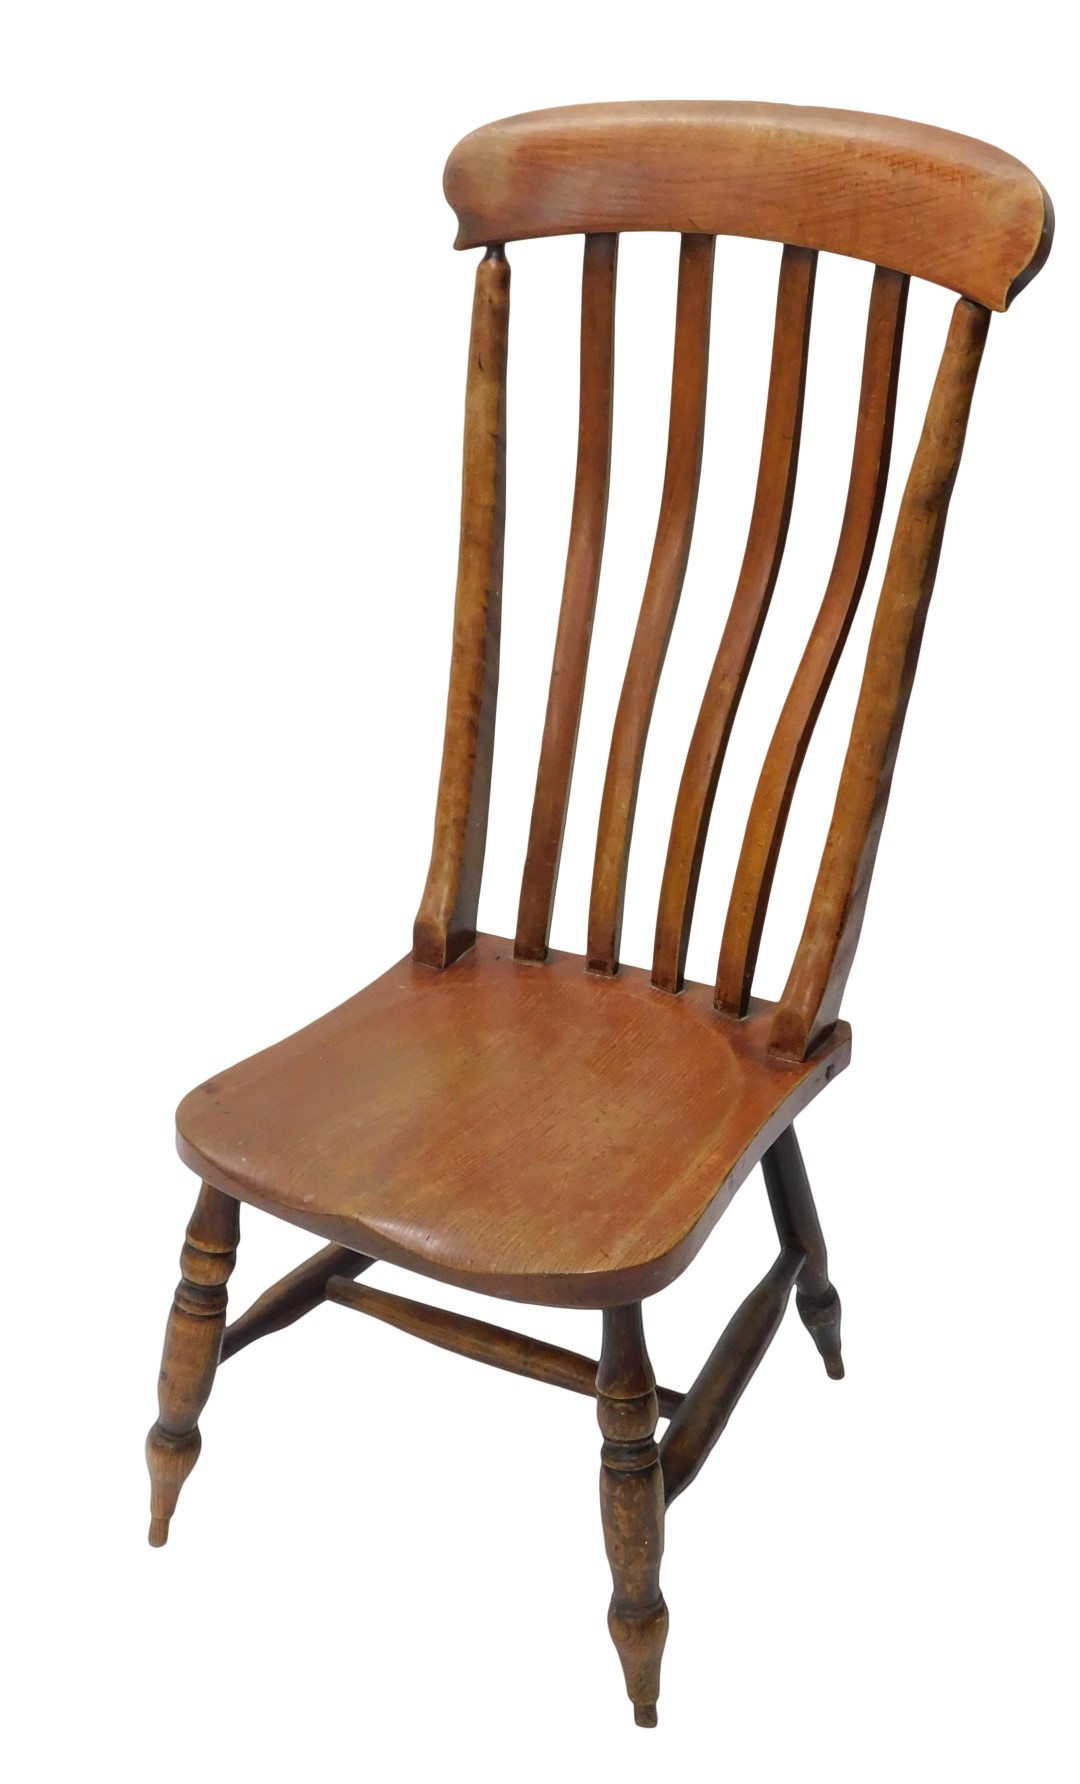 A 19thC beech lath back side chair, with a solid seat, on turned legs with H stretcher.